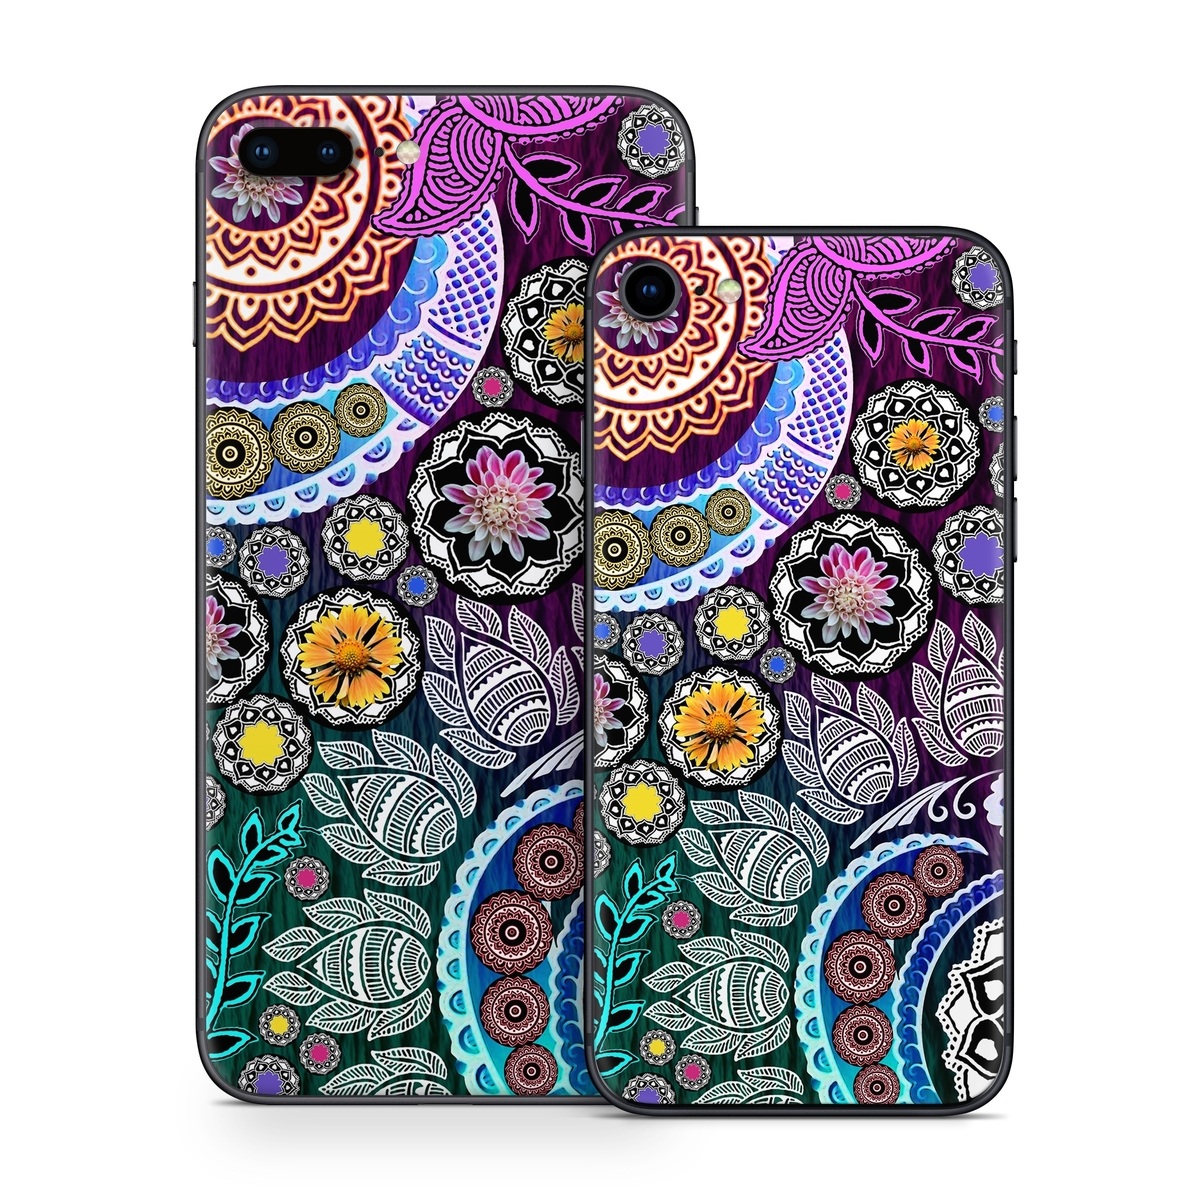 iPhone 8 Series Skin design of Pattern, Psychedelic art, Art, Visual arts, Design, Floral design, Textile, Motif, Circle, Illustration, with black, gray, purple, blue, green, red colors